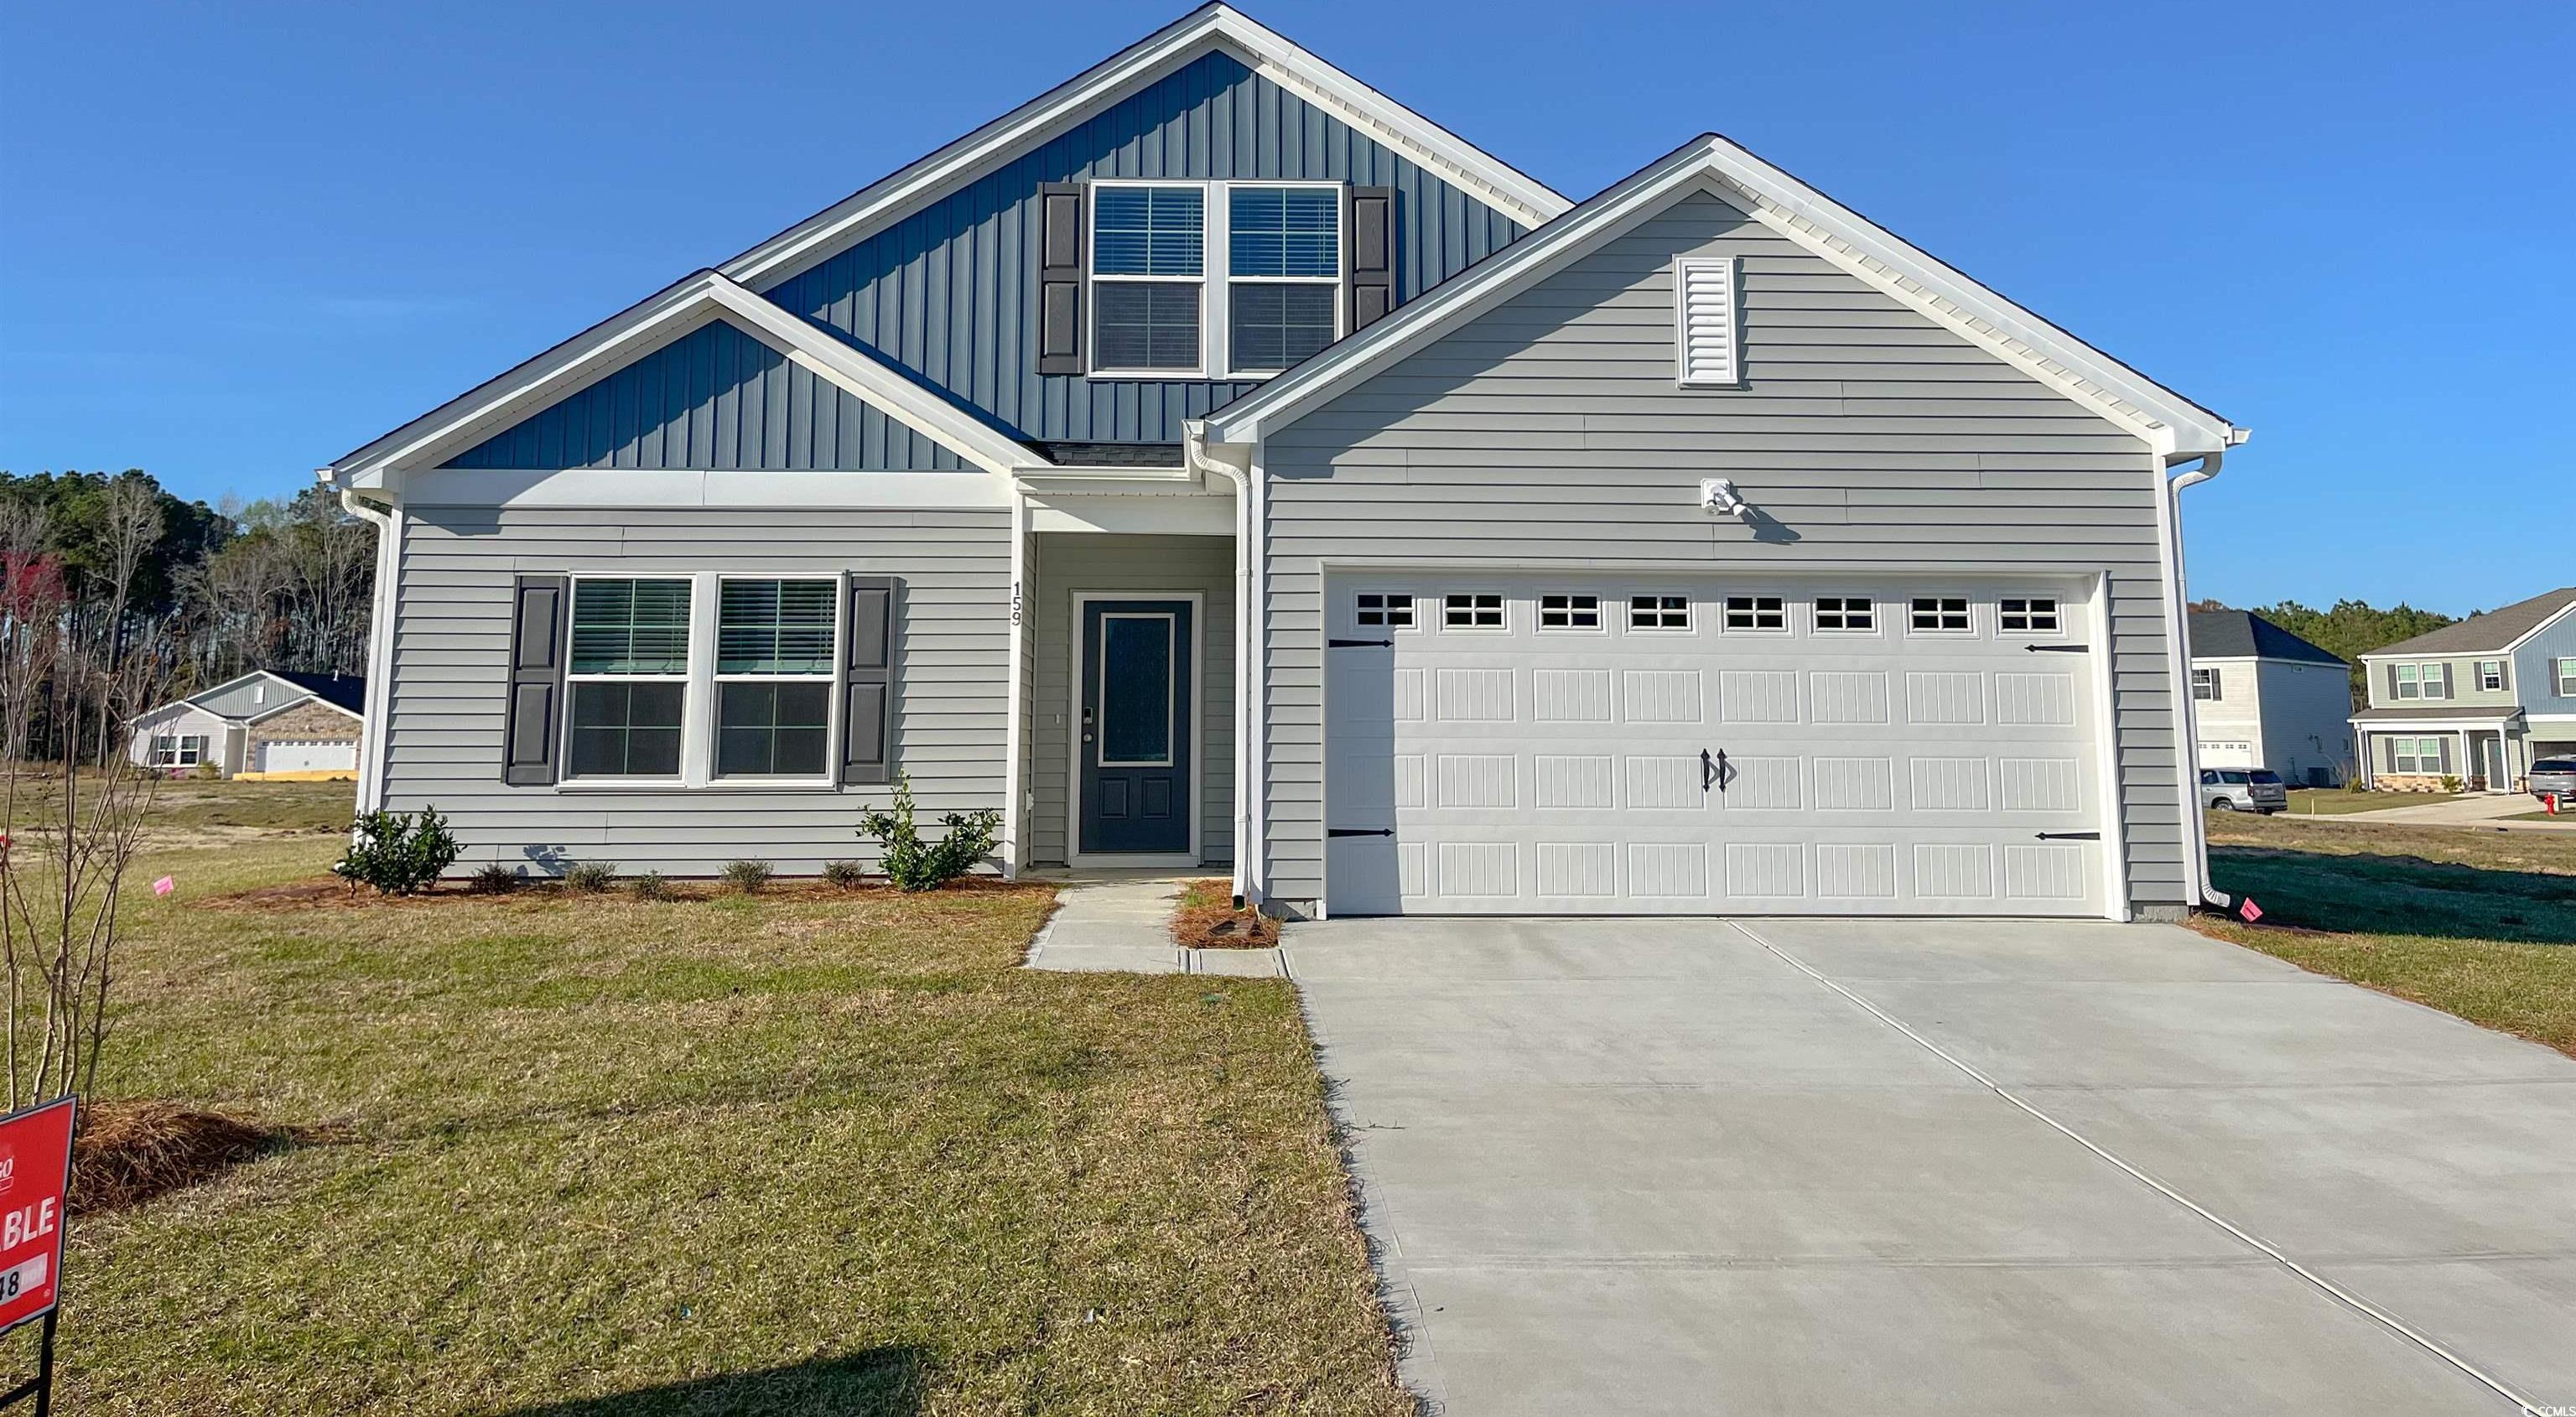 Photo one of 159 Wagner Cir. Conway SC 29526 | MLS 2318112